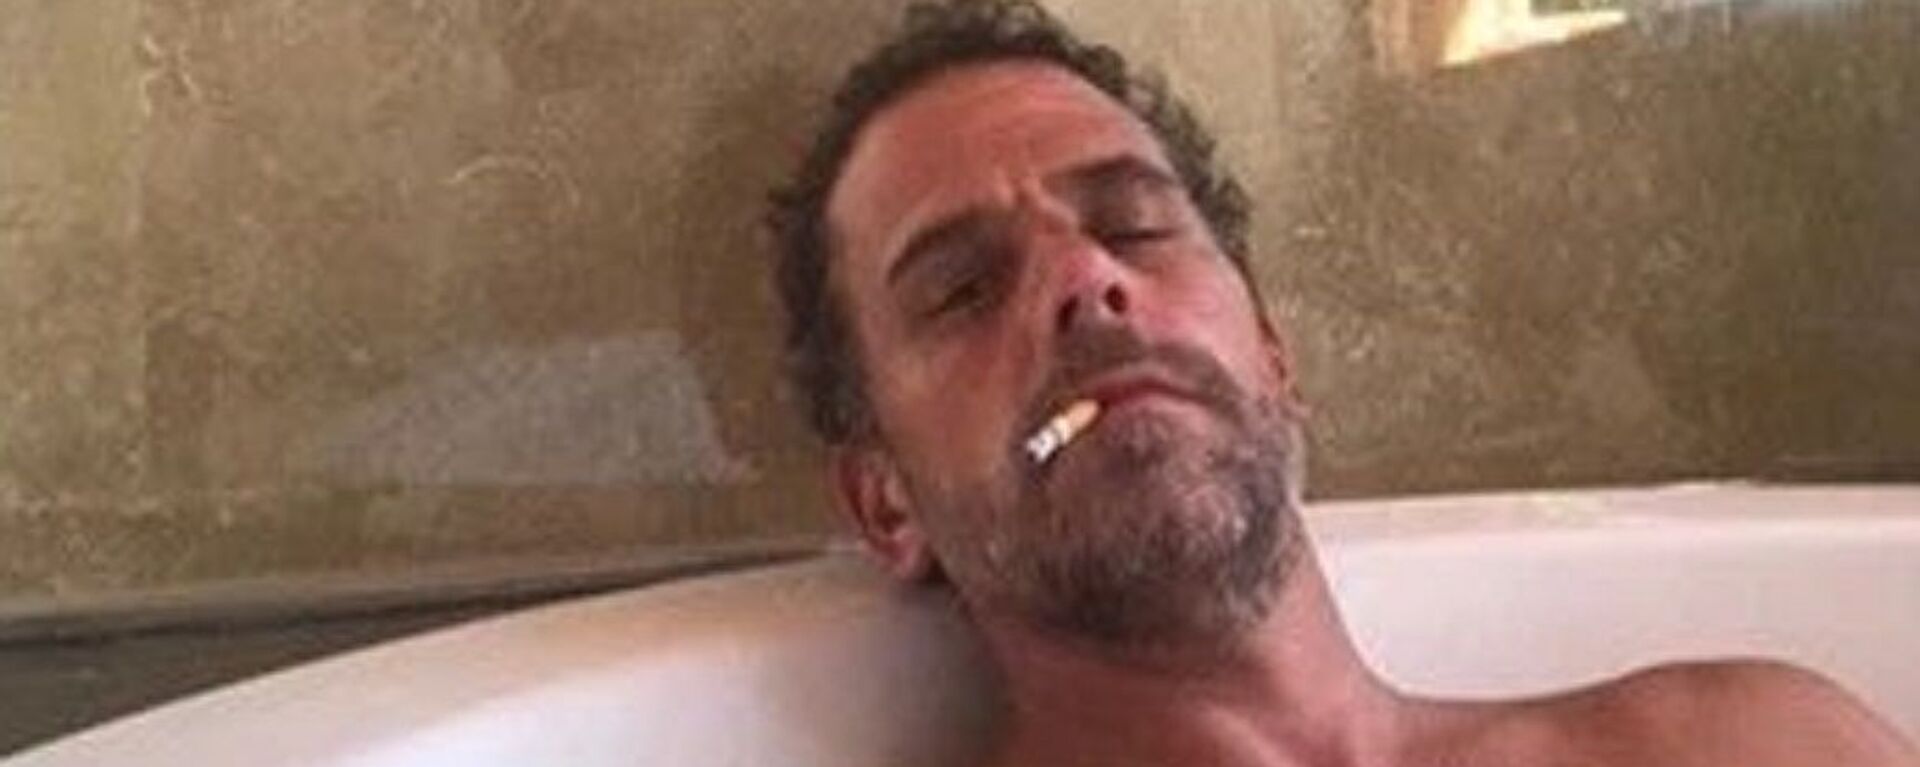 Photo of Hunter Biden relaxing in a bathtub, reportedly taken from a computer dropped off at a Delaware computer repair shop. - Sputnik International, 1920, 20.12.2022